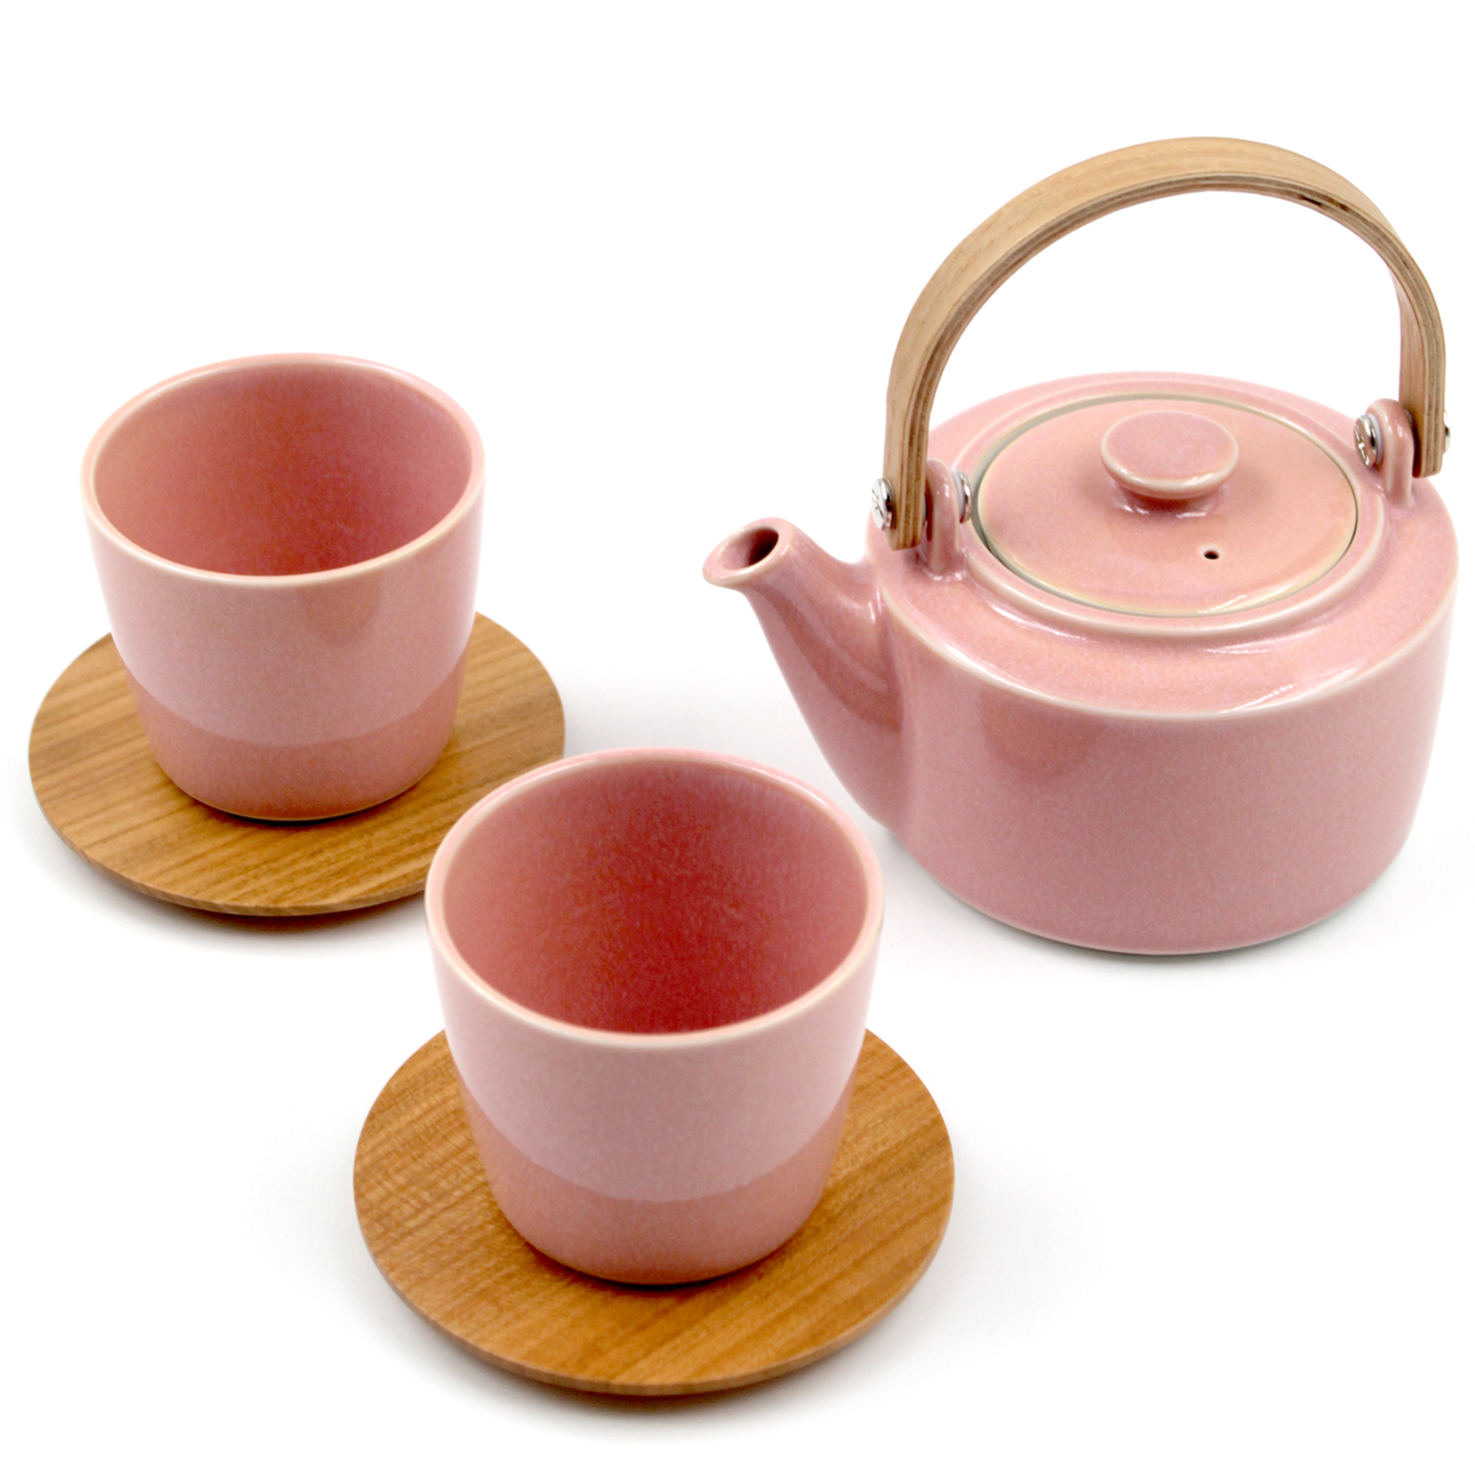 Two Tone Wooden Tea Cup